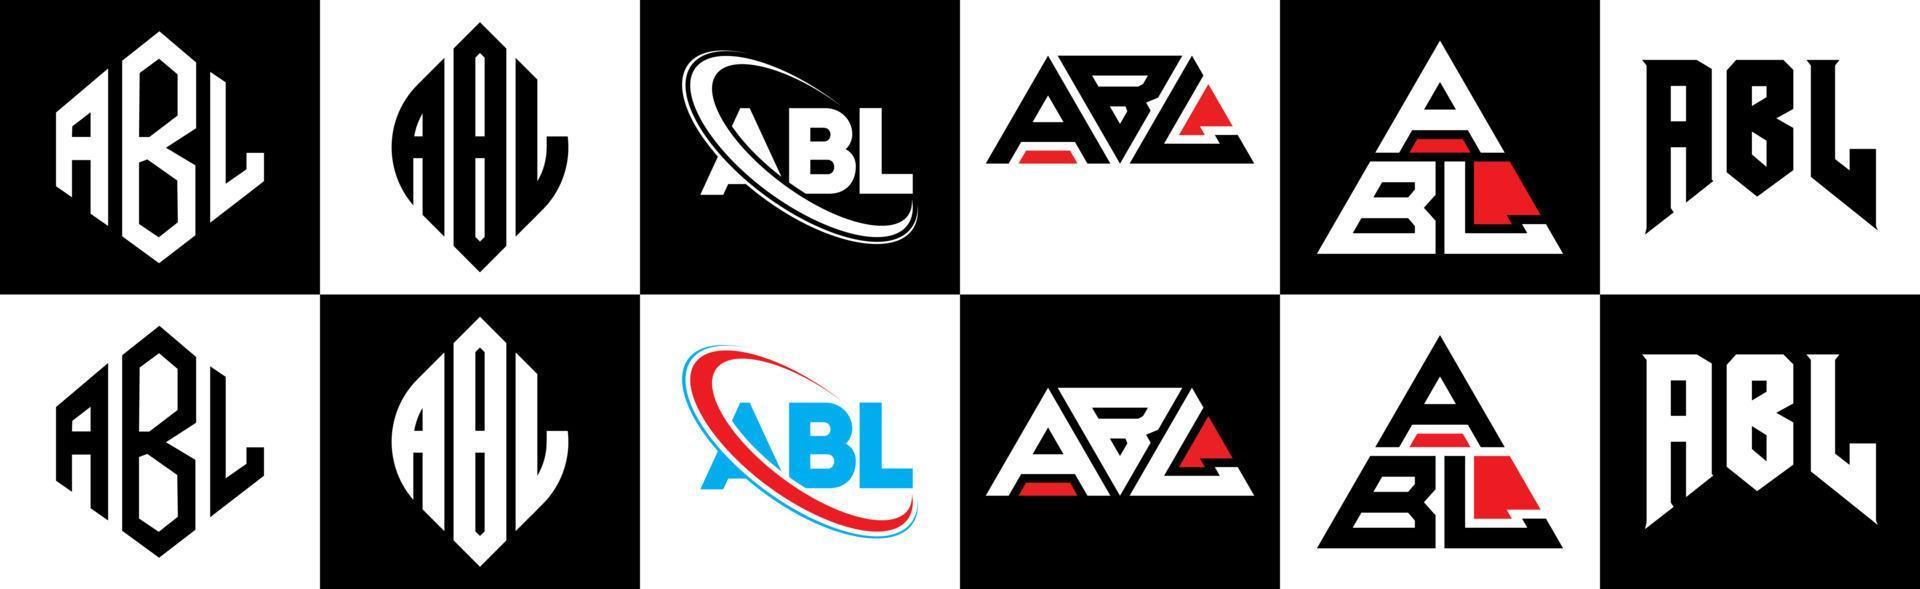 ABL letter logo design in six style. ABL polygon, circle, triangle, hexagon, flat and simple style with black and white color variation letter logo set in one artboard. ABL minimalist and classic logo vector